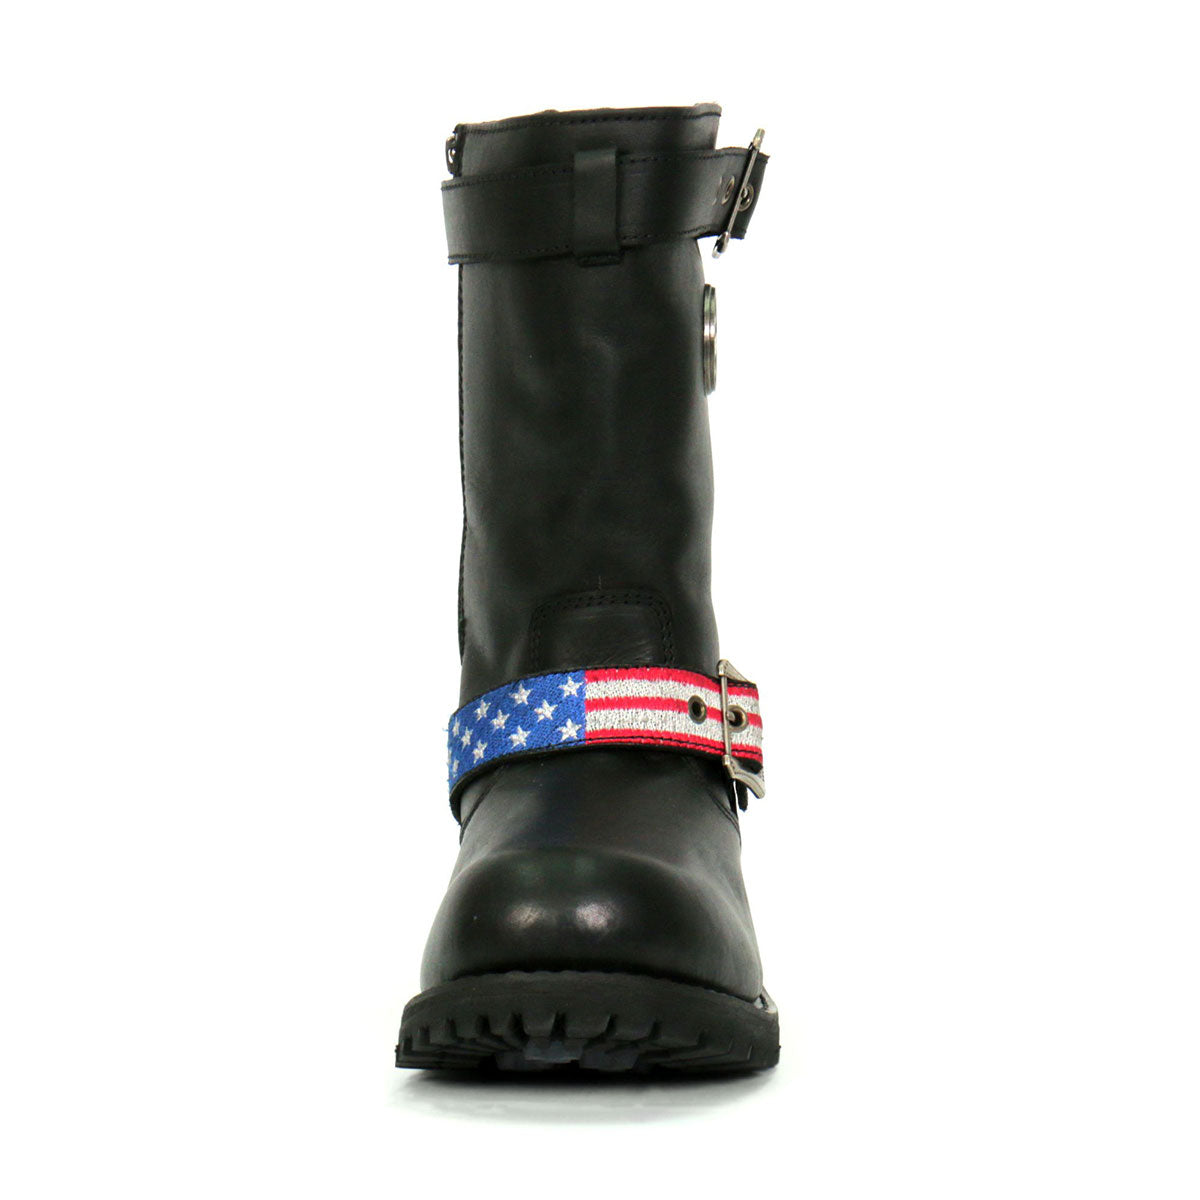 Hot Leathers BTM1019 Men's Black Tall Round Toe Harness Boots with Flag Strap